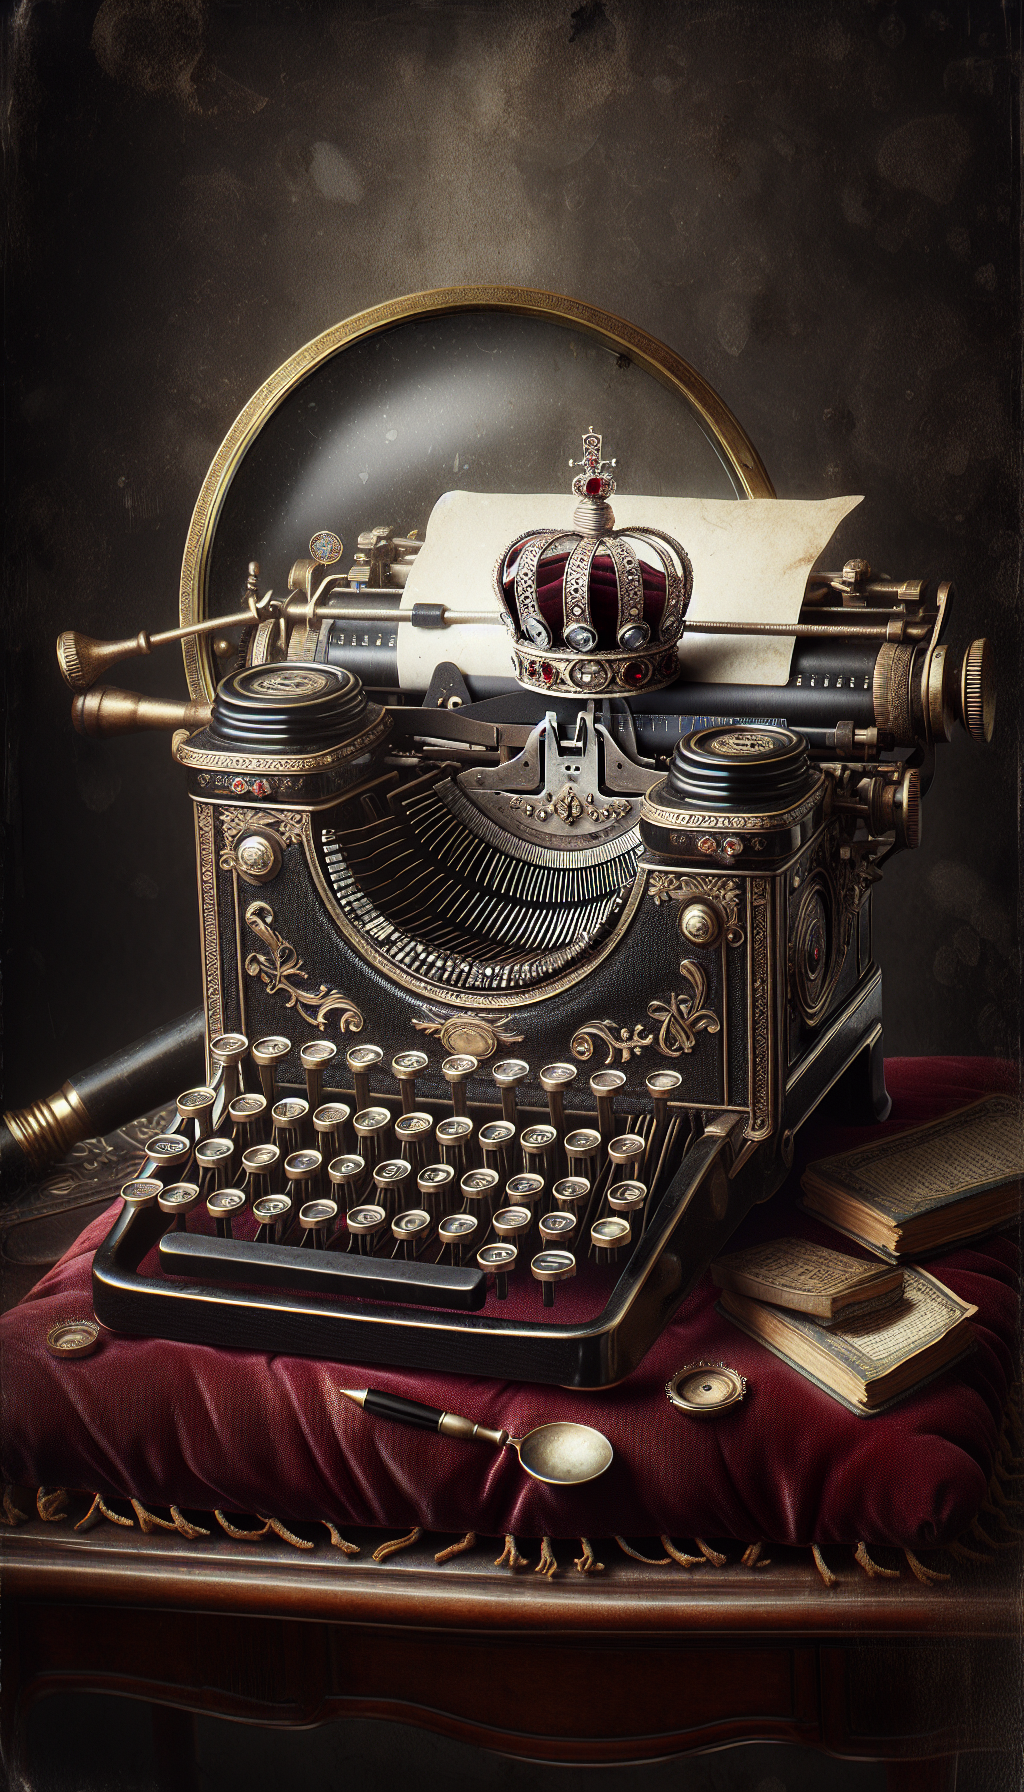 An ornate, vintage royal typewriter sits regally atop a velvet cushion, with a jeweled crown resting on its carriage. A magnifying glass hovers over it, highlighting the intricate details and pristine condition of the keys and typebars, symbolizing the careful assessment of its value, juxtaposed against a faded, ink-splattered background conveying its age and legacy.